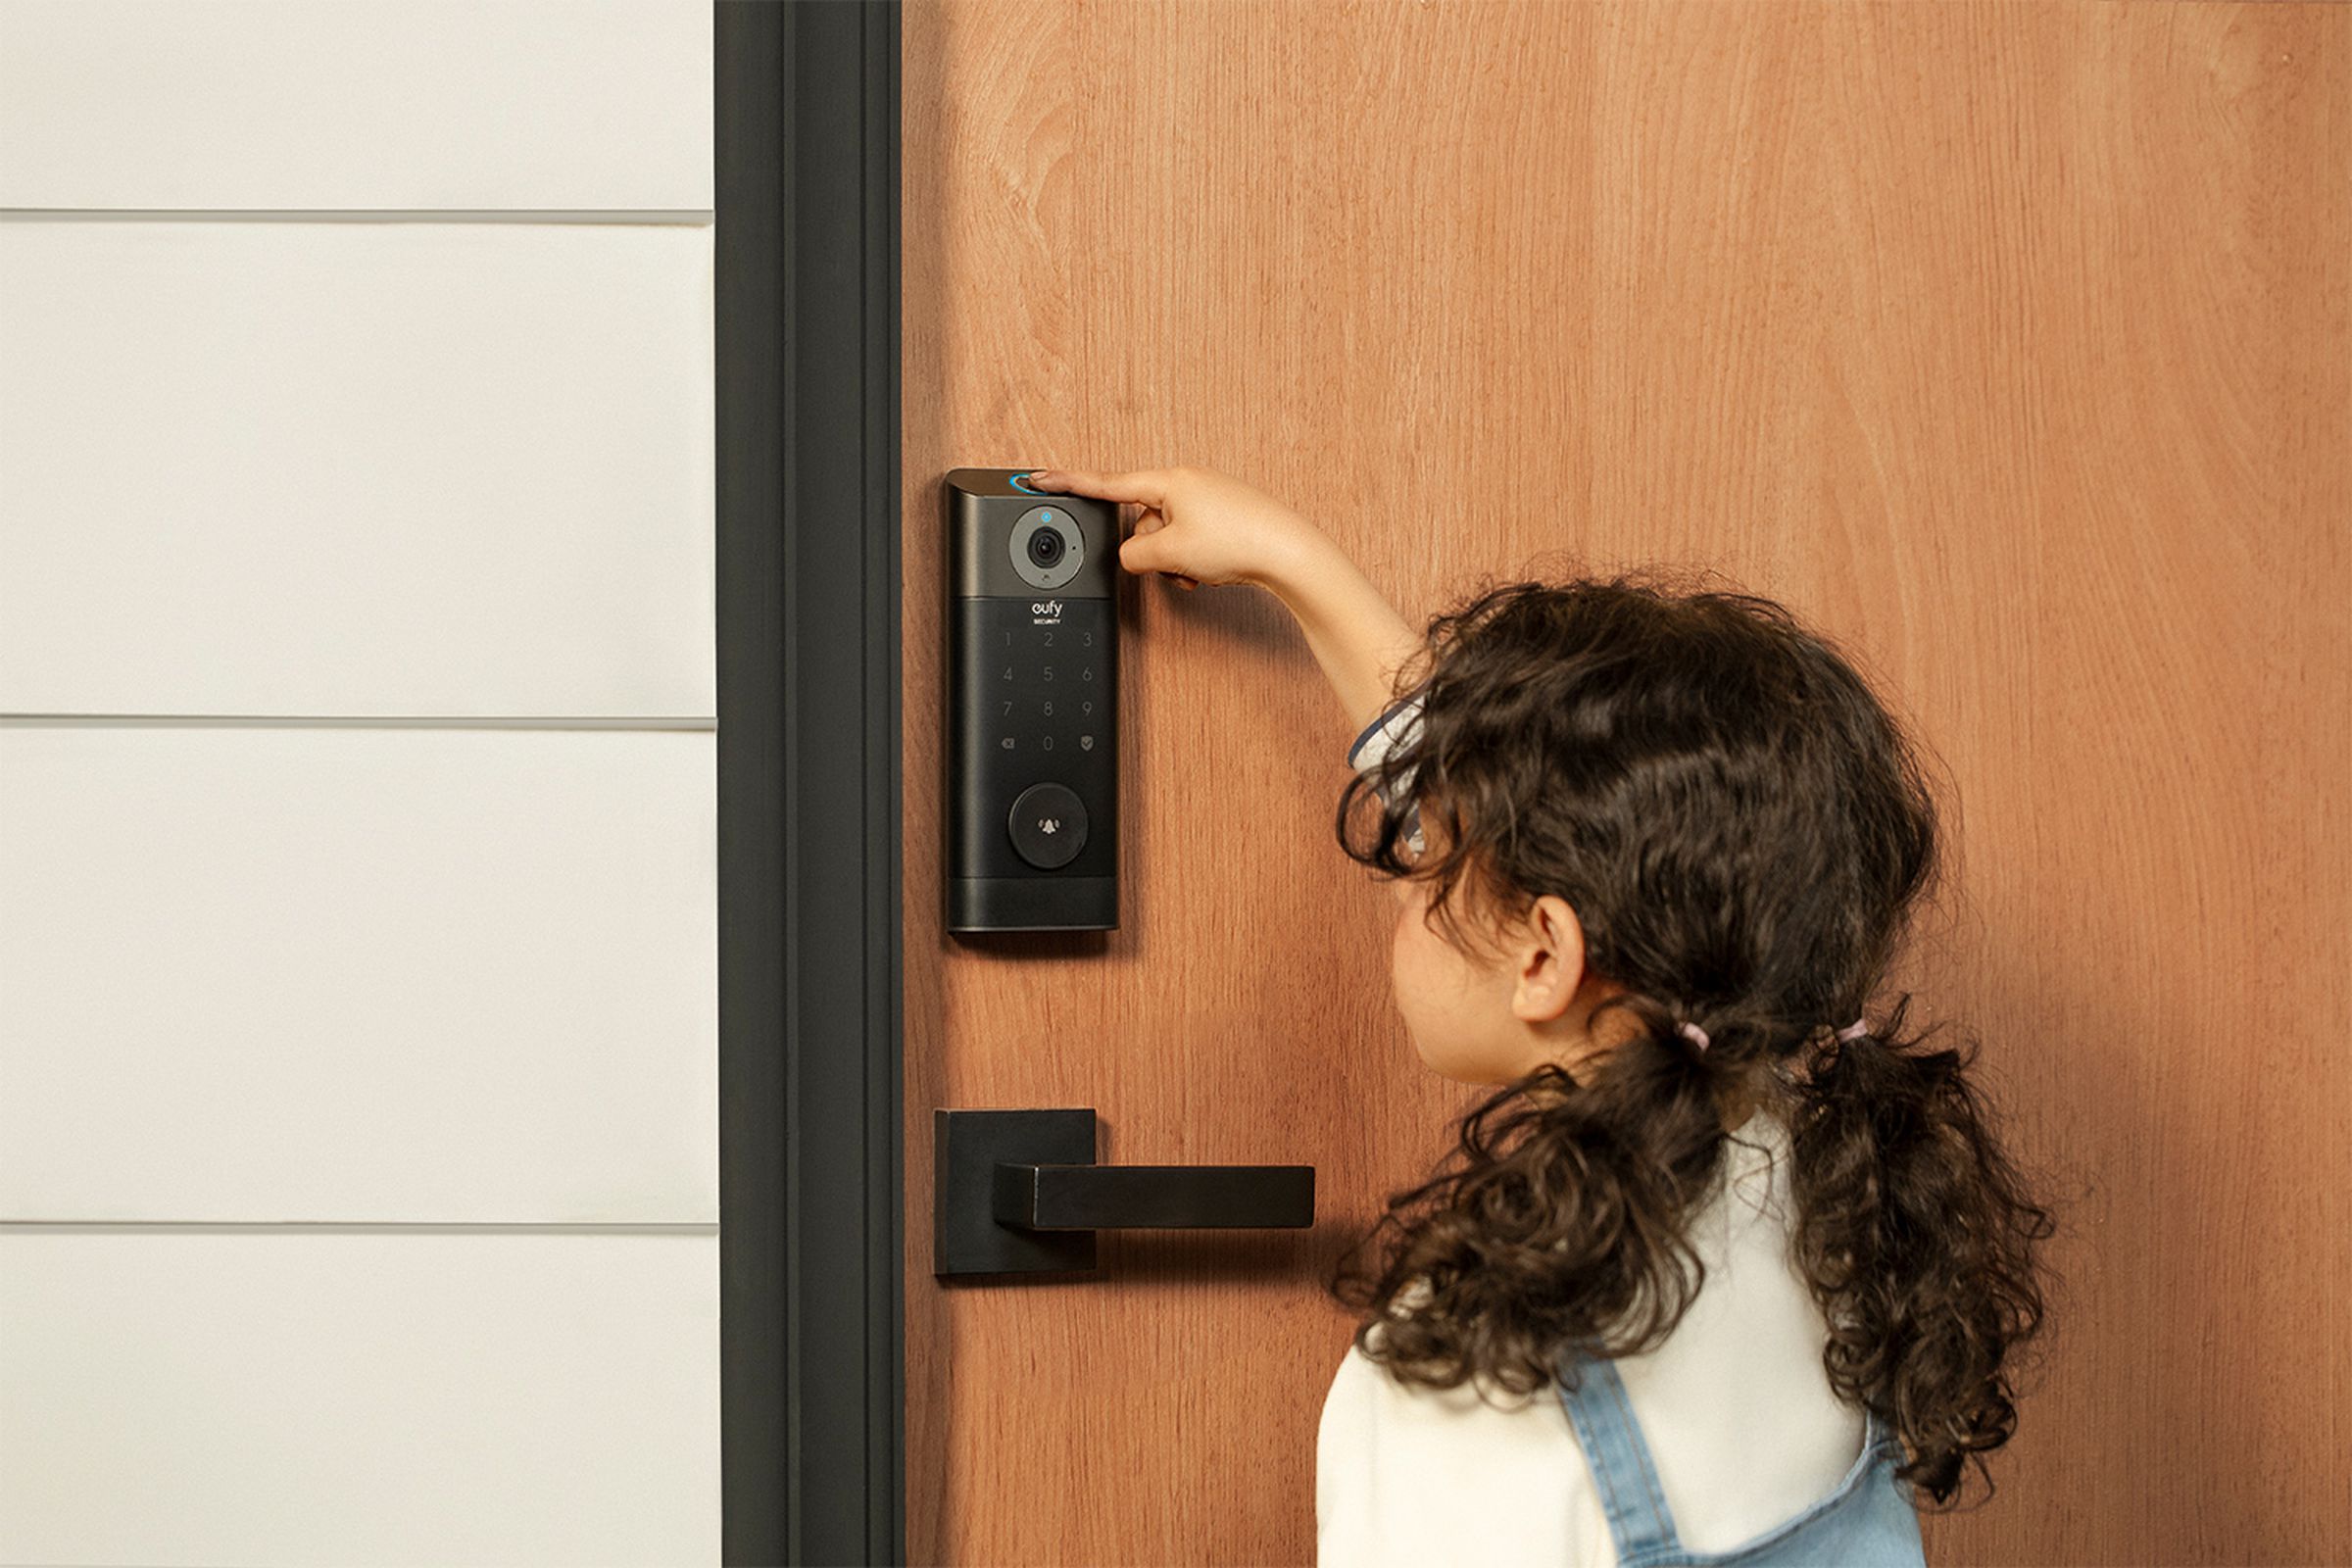 The Video Smart Lock has a fingerprint reader that can learn to recognize your fingerprints to unlock faster.